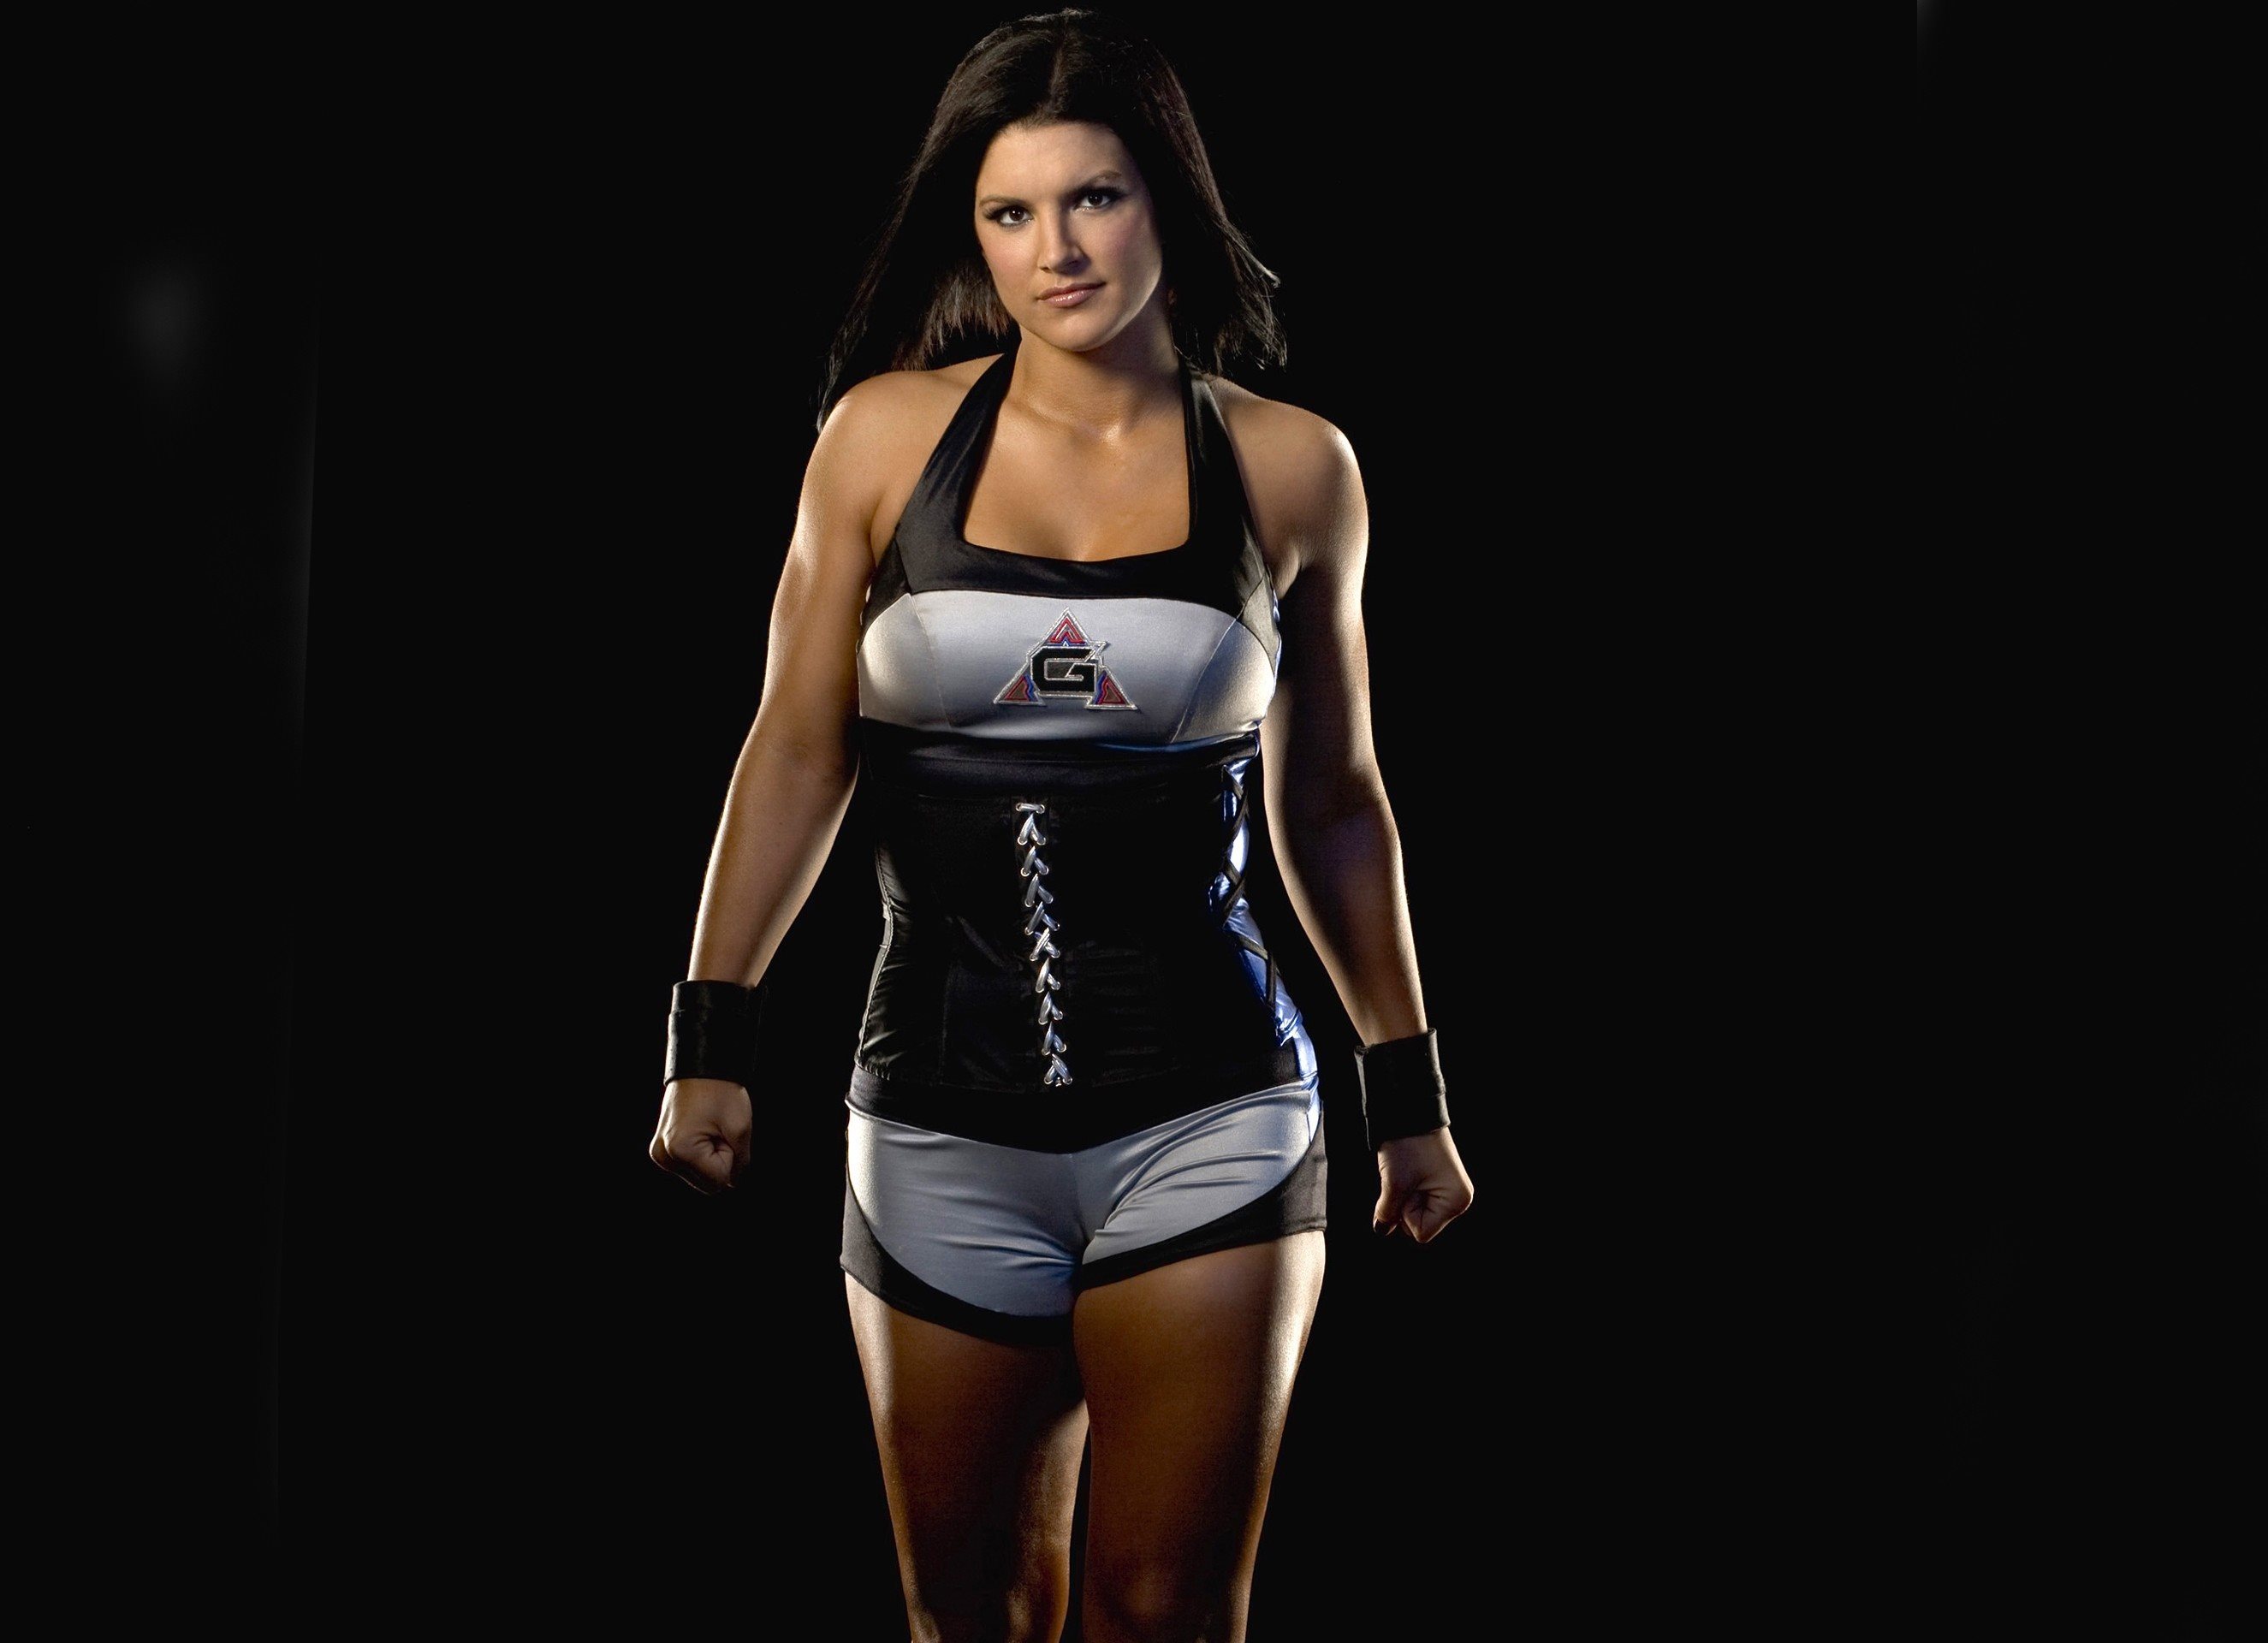 Download wallpaper mma fighter, gina carano, actress for desktop with resolution 2650x1920. High Quality HD picture wallpaper